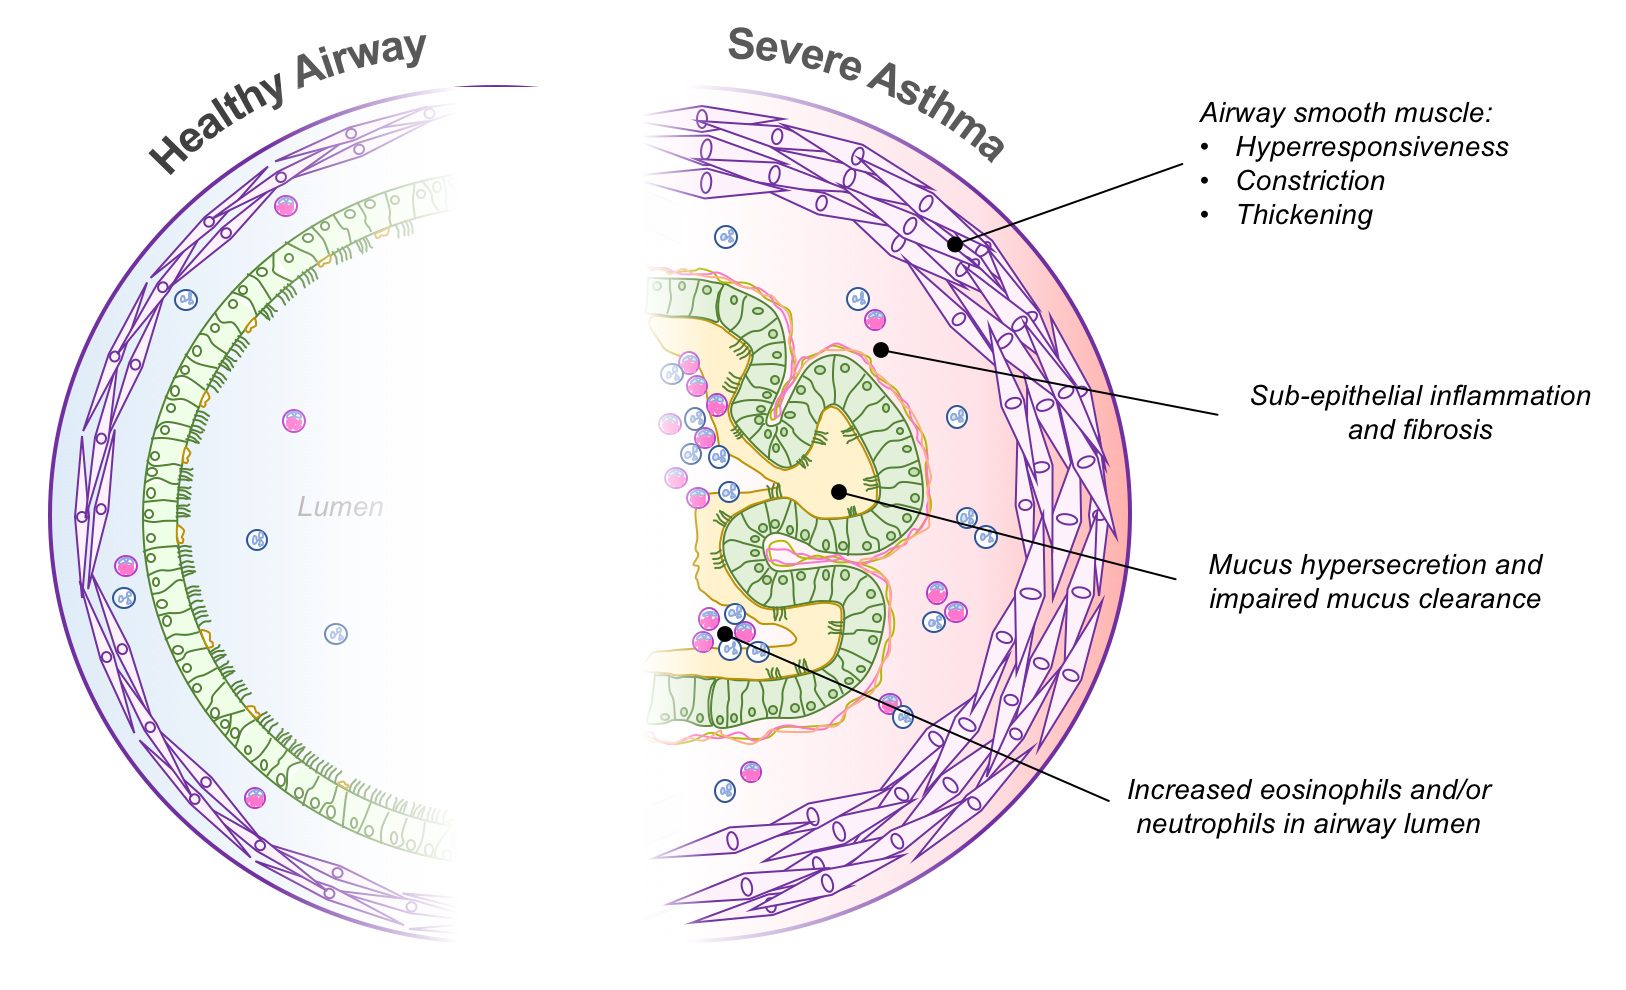 info-graphic about Severe Asthma Pathophysiology, Healthy airway and what is severe asthma